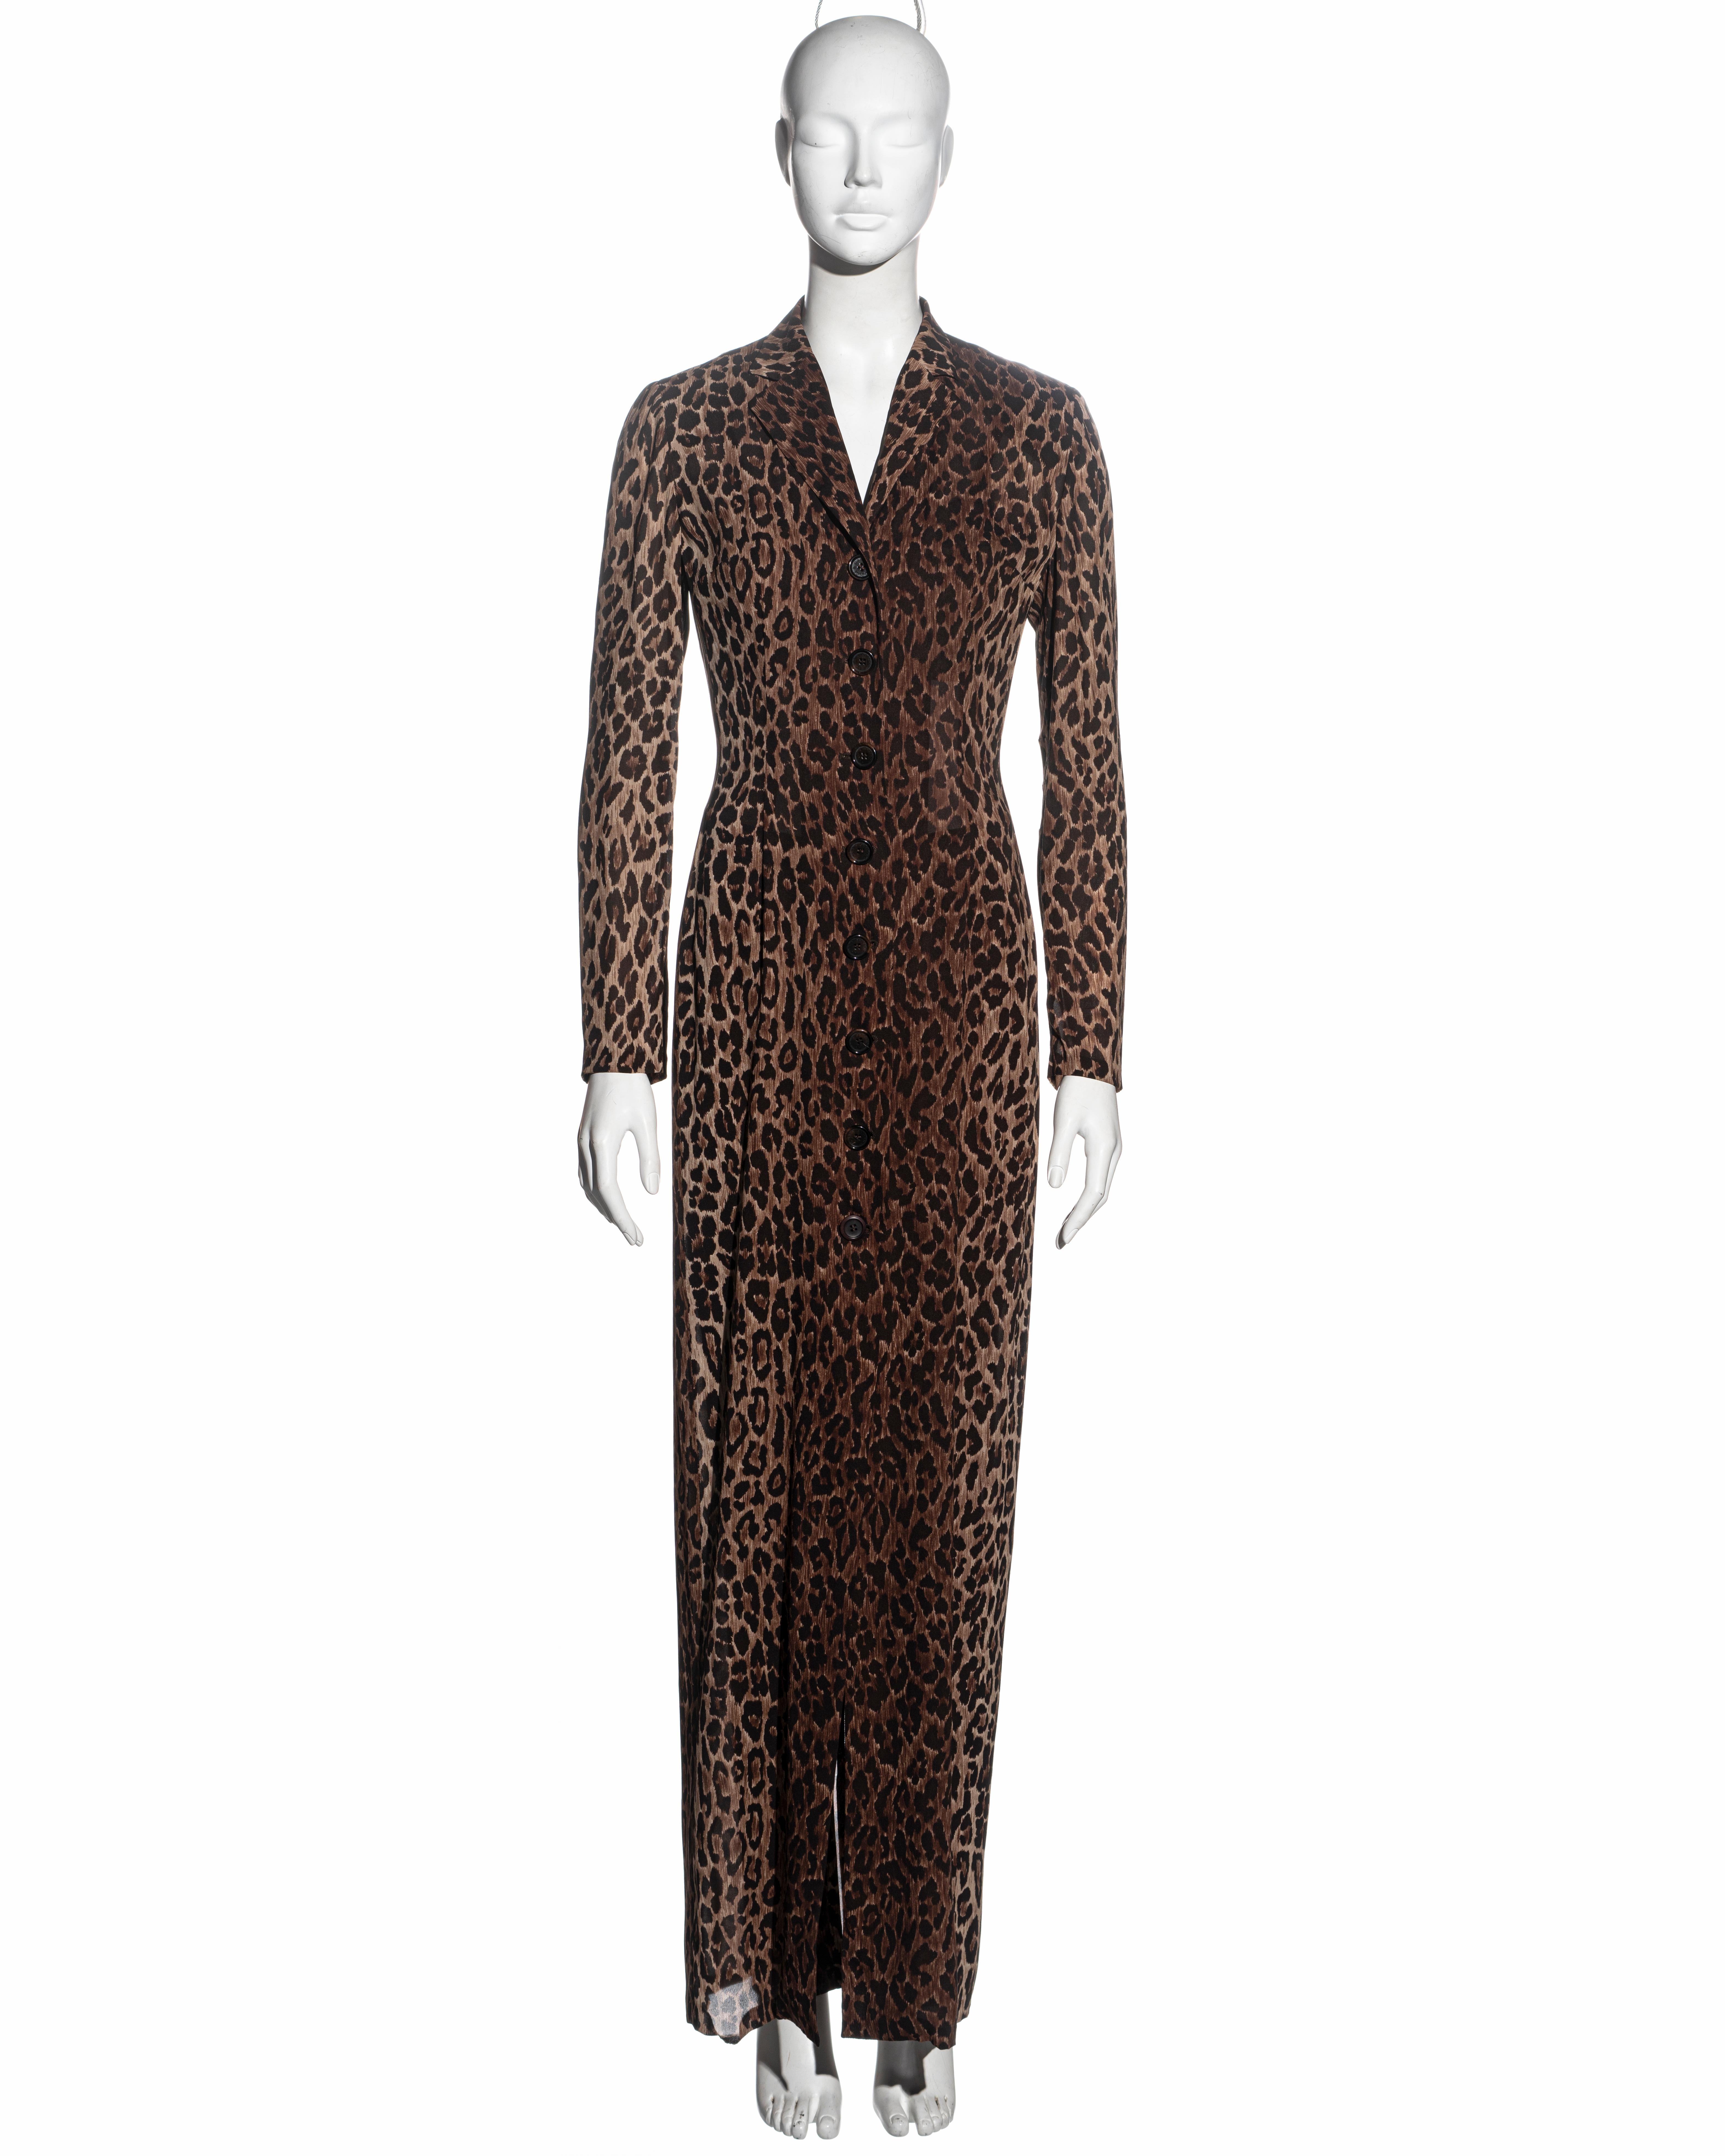 Dolce & Gabbana leopard print silk coat, pants and bra ensemble, ss 1997 In Excellent Condition For Sale In London, GB